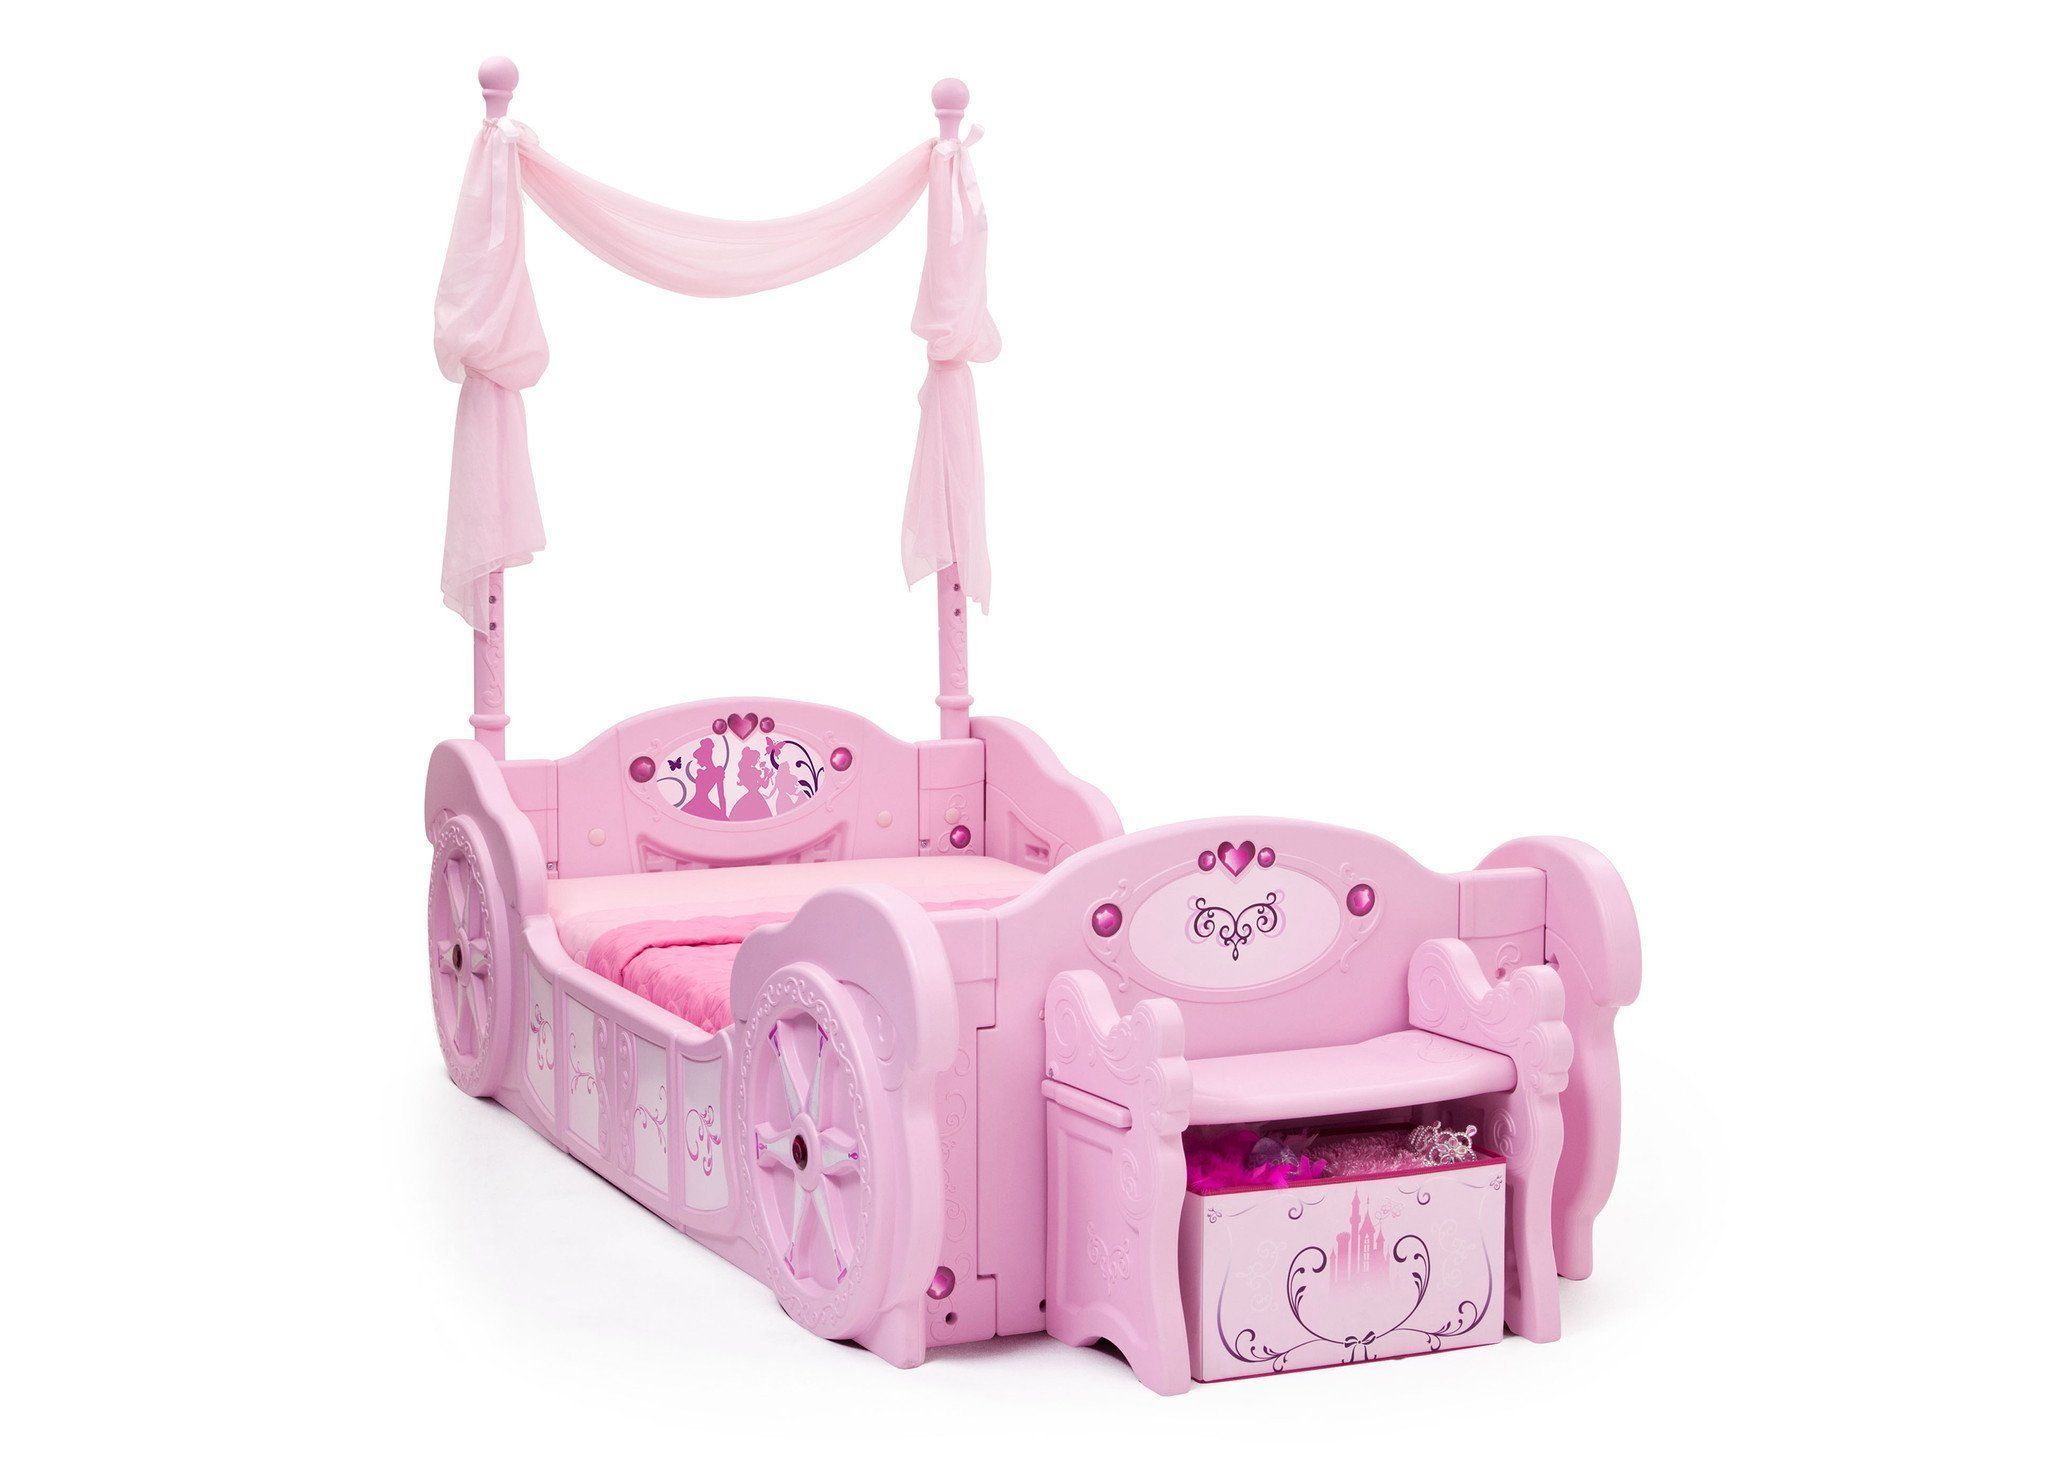 Princess Carriage Convertible Toddler-to-Twin Bed | Delta Children